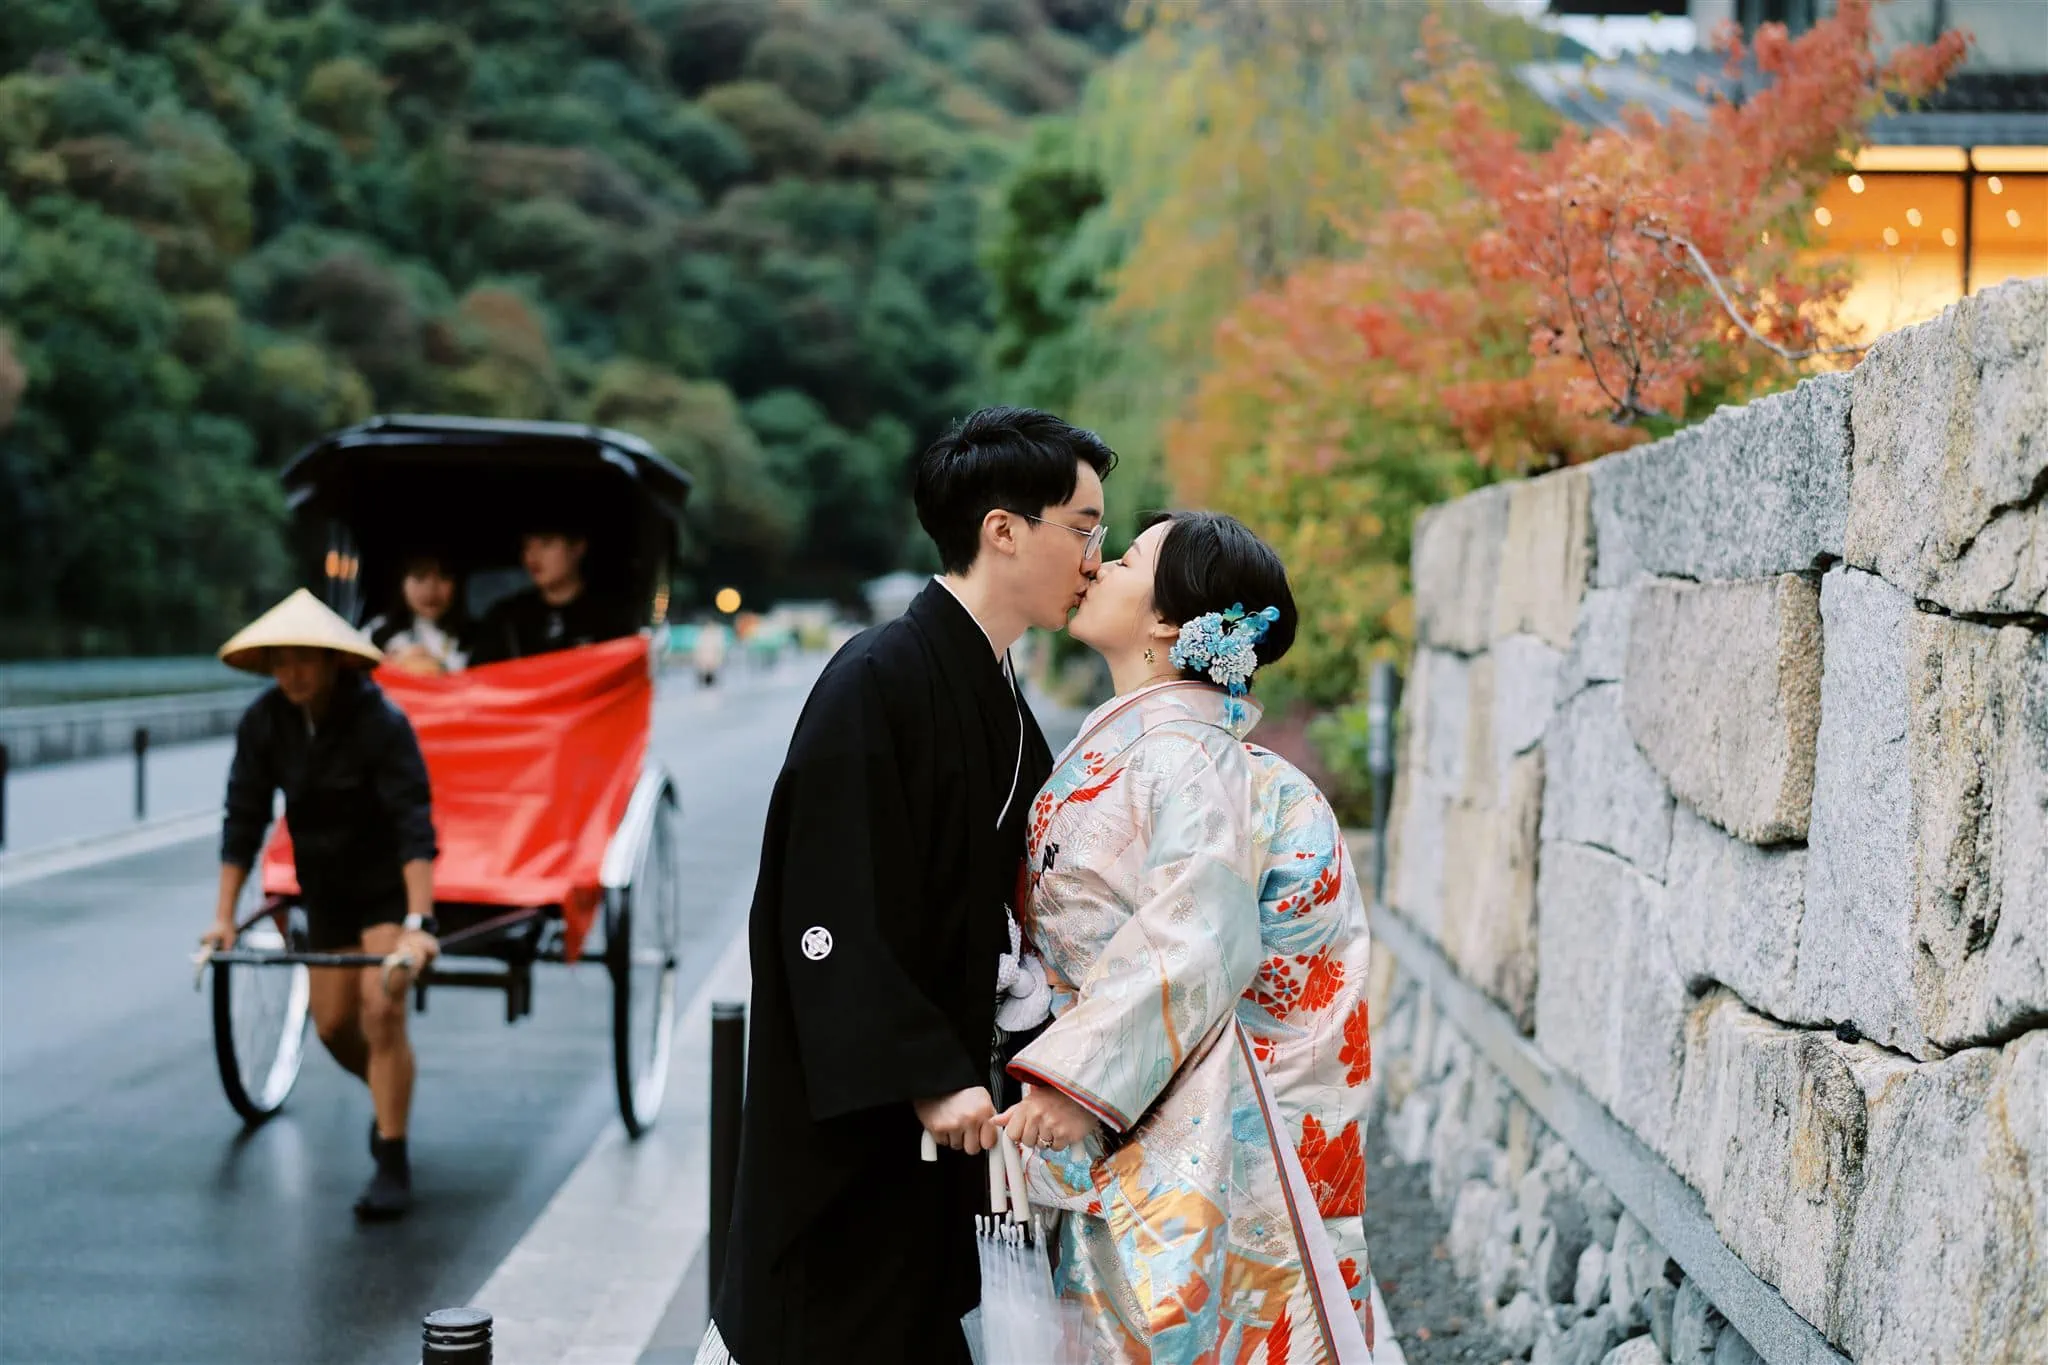 Japan Elopement Wedding Photographer, Planner & Videographer | A Japanese couple embracing in front of a carriage during their Kyoto Japan Wedding & Elopement Package.